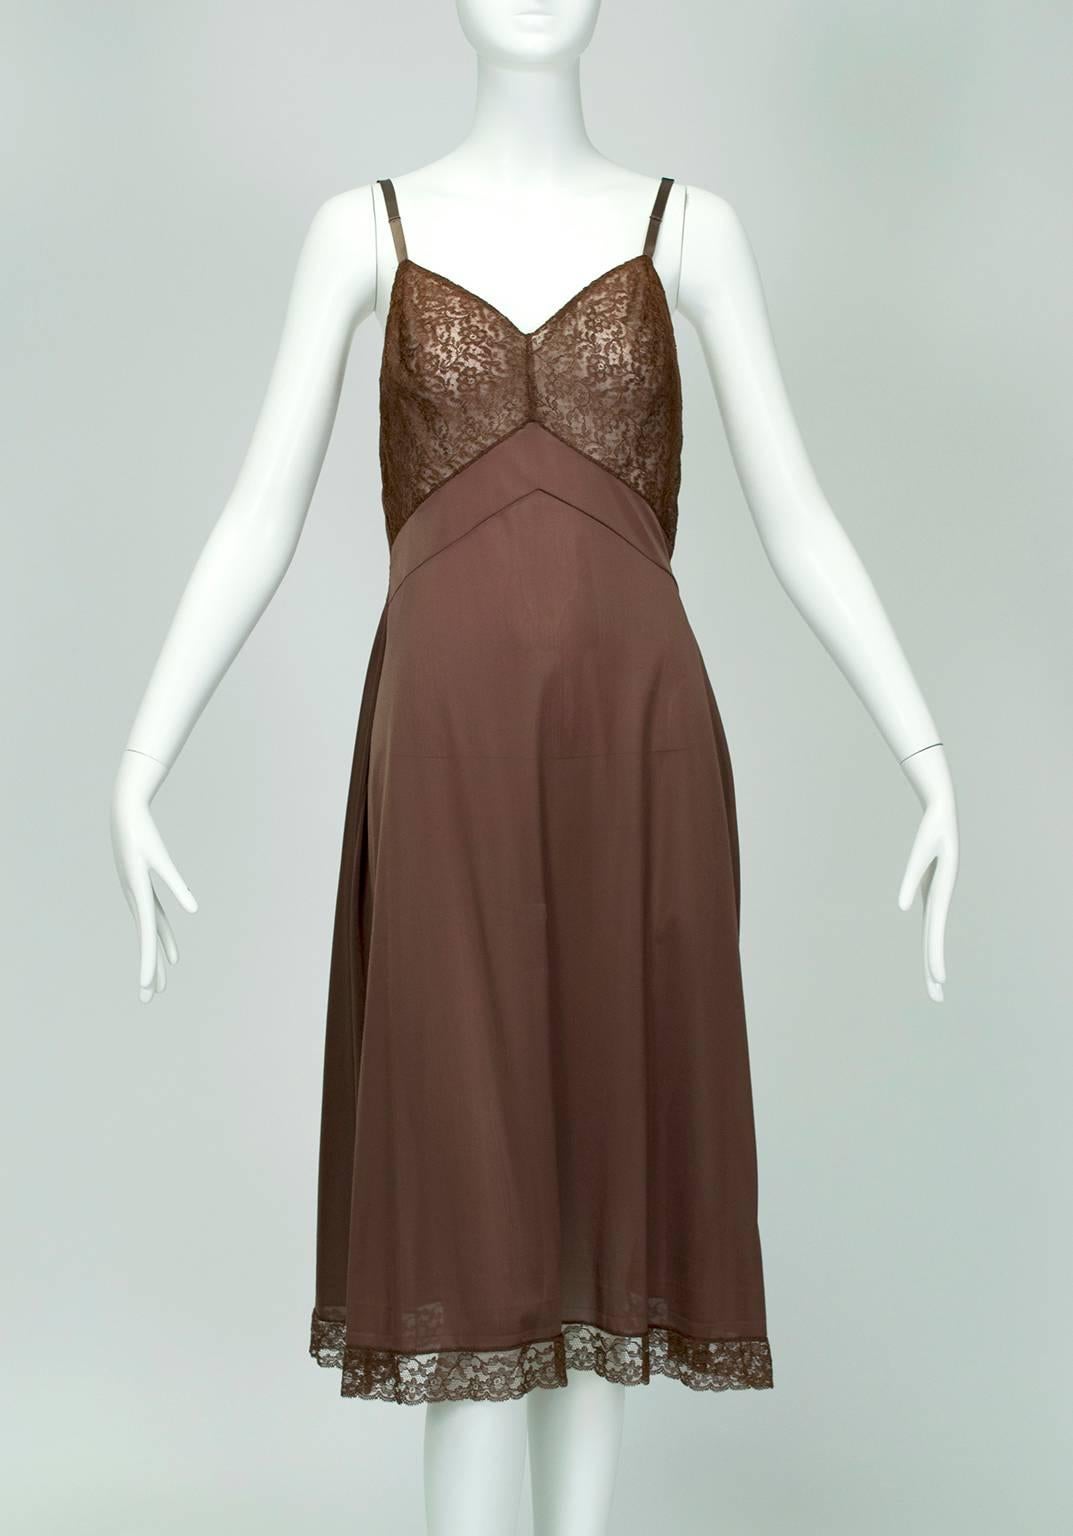 Women's Hollywood Regency Sheer Brown Lace Ankle-Length Capelet Gown and Slip - M, 1930s For Sale